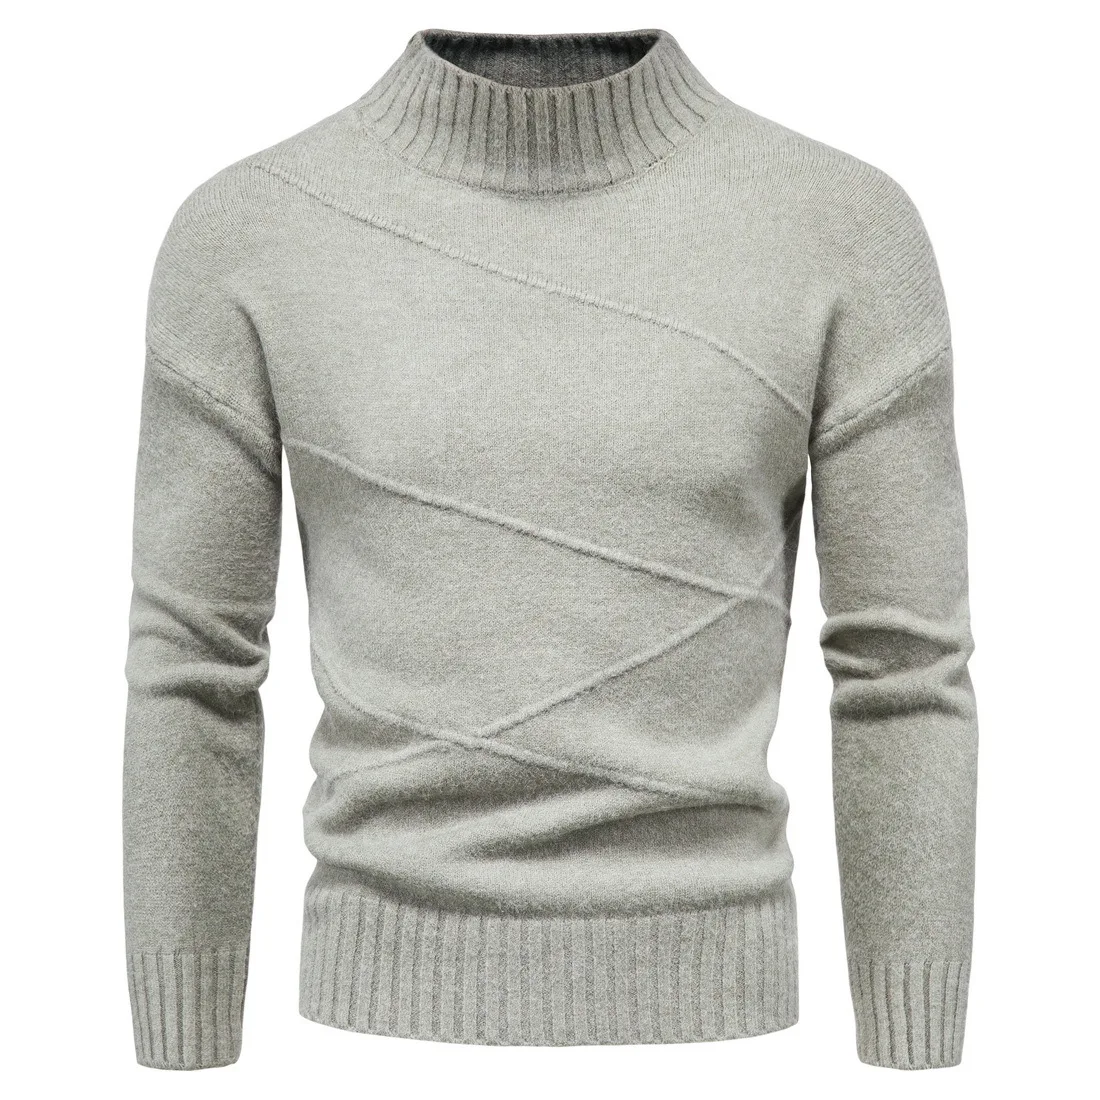 Solid  New  Men Casual  Sweater Autumn Winter Warm  Men Clothes